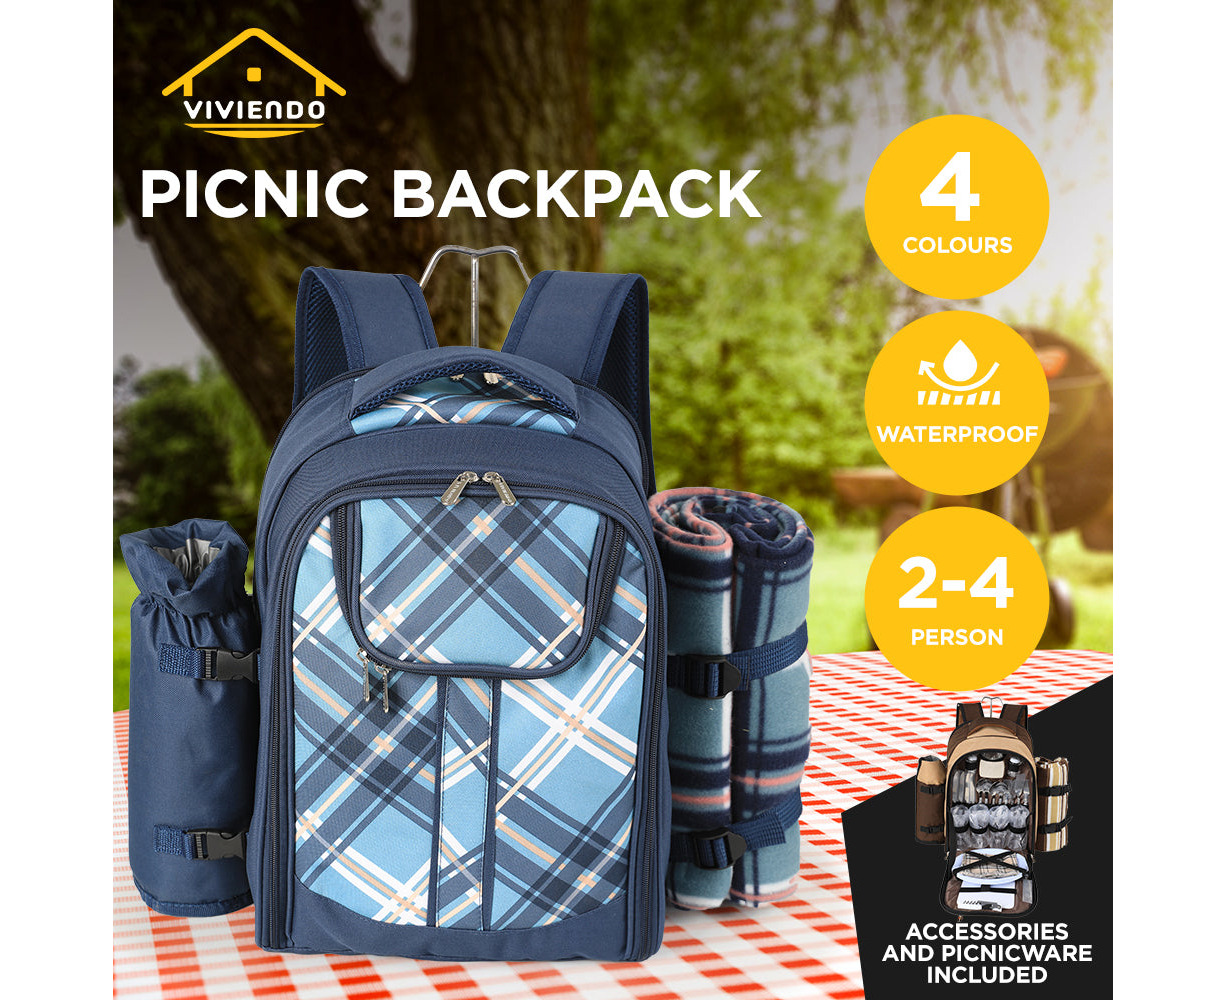 Apollo Walker 2 Person Picnic Backpack - Great for Hiking Camping or  Picnics!